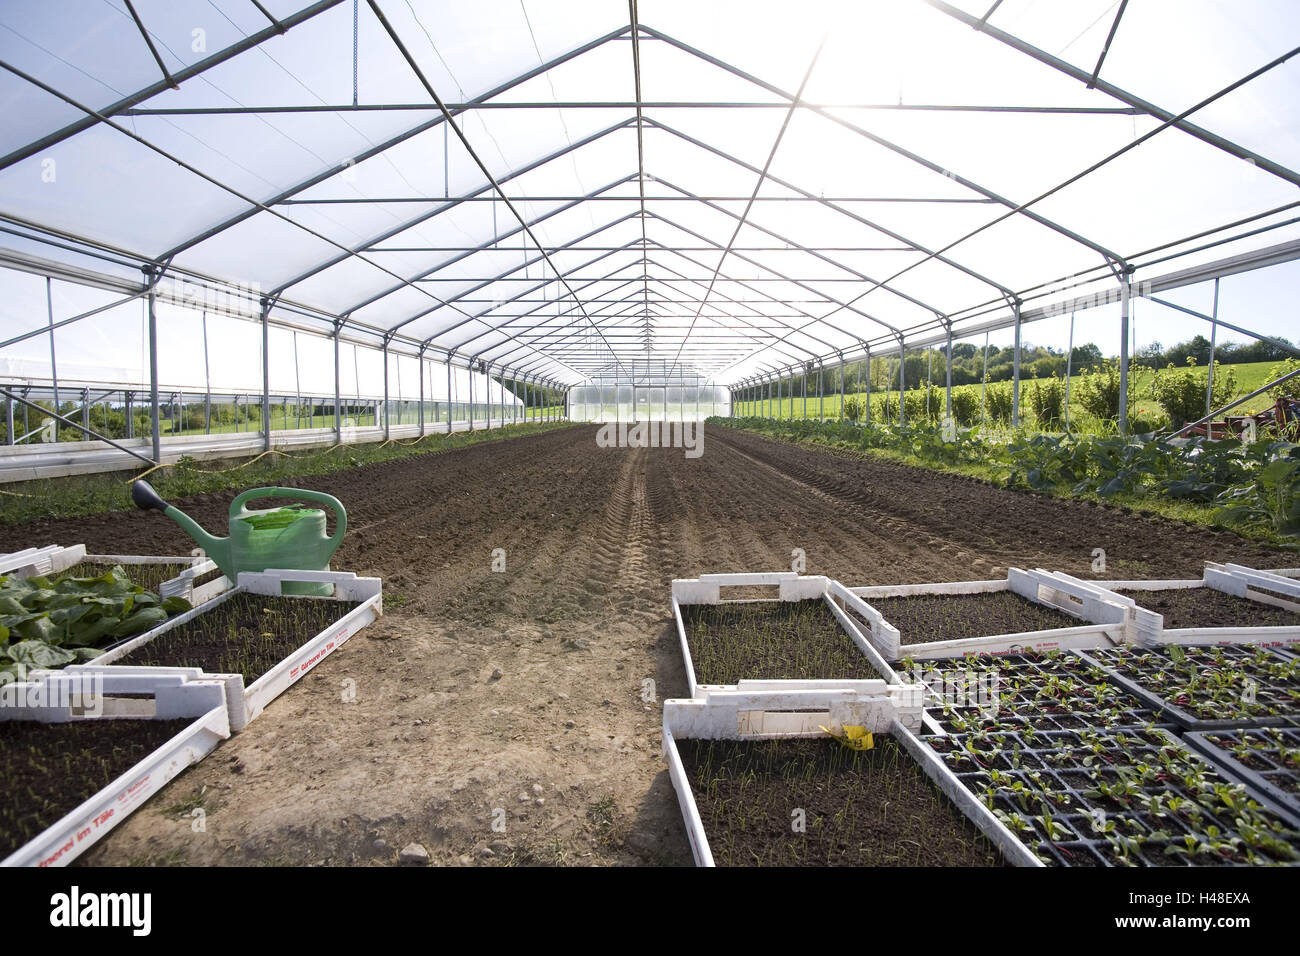 Greenhouse, inside, hothouse, market garden, cultivation, cultivation, plants, vegetables, vegetable plants, the sun, growth, brightly, sunny, flooded with light, protected, greenhouse, roofs, watering can, solar irradiation, Setzlinge, cast, grow, Stock Photo